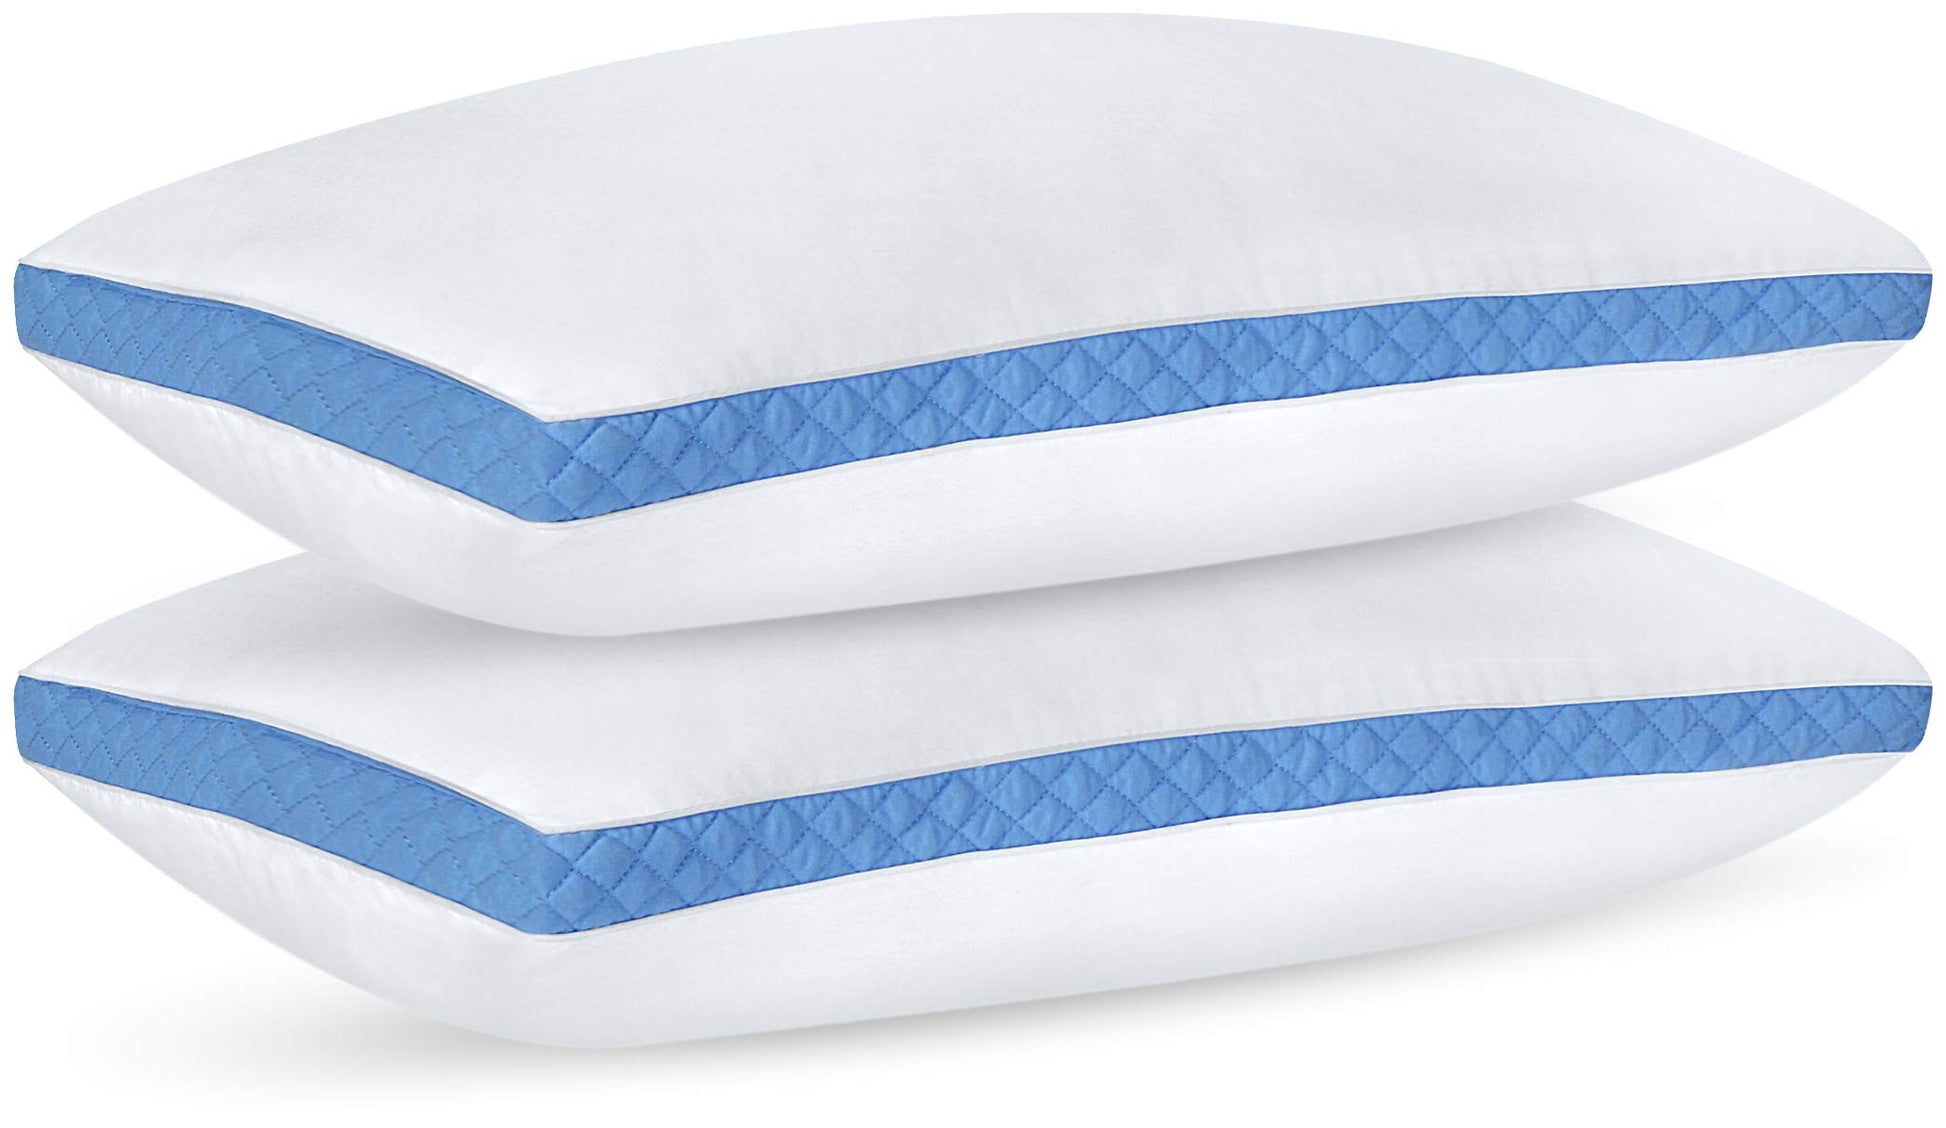 Utopia Bedding Bed Pillows for Sleeping Queen Size (White), Set of 2,  Cooling Hotel Quality, Gusseted Pillow for Back, Stomach or Side Sleepers